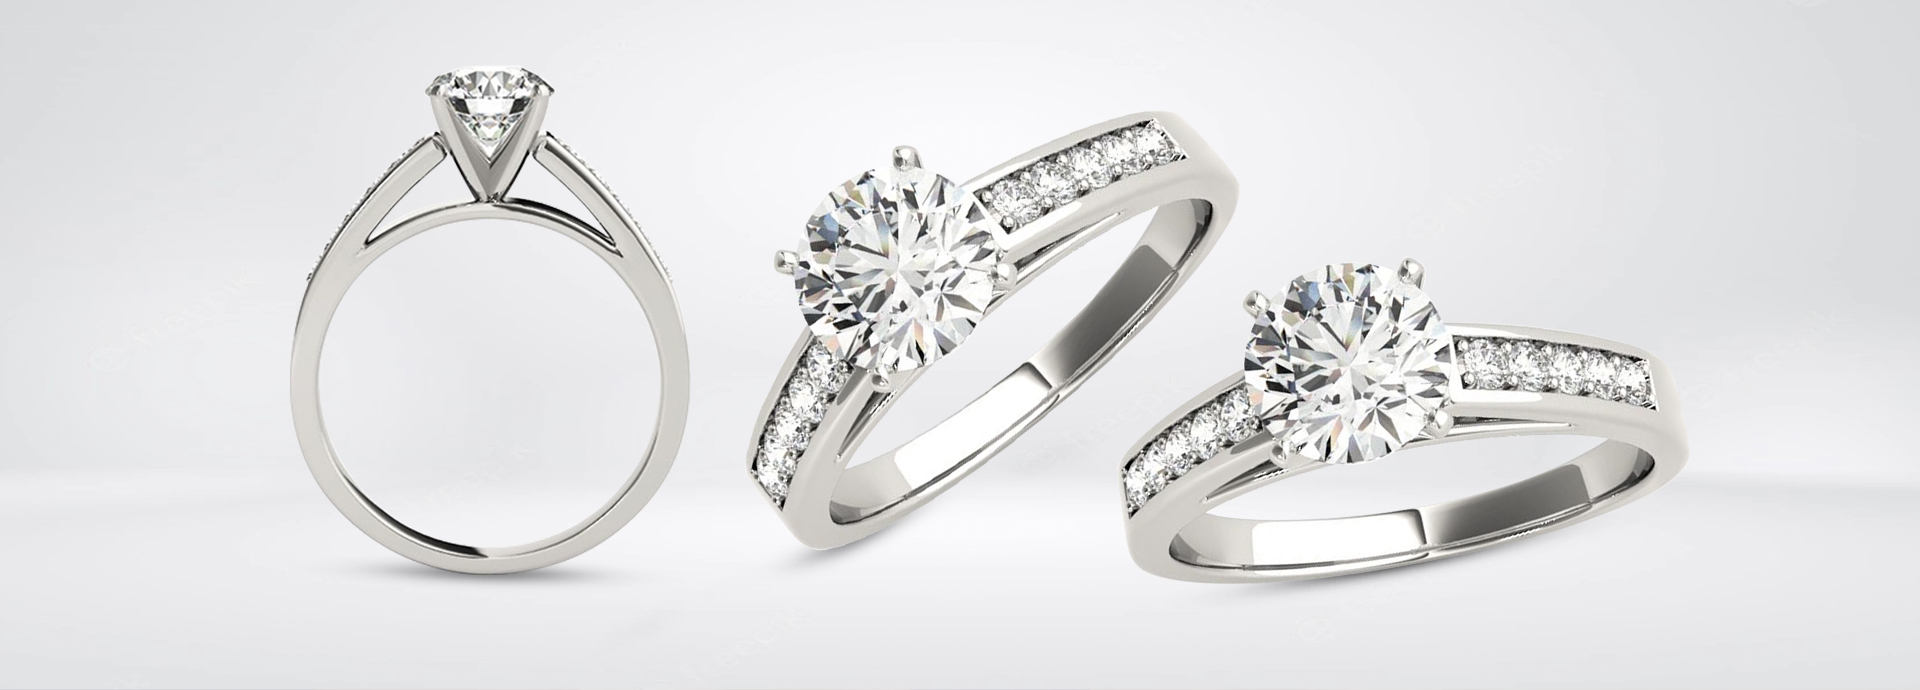 Top 3 Channel Diamond Rings to Buy in 2023